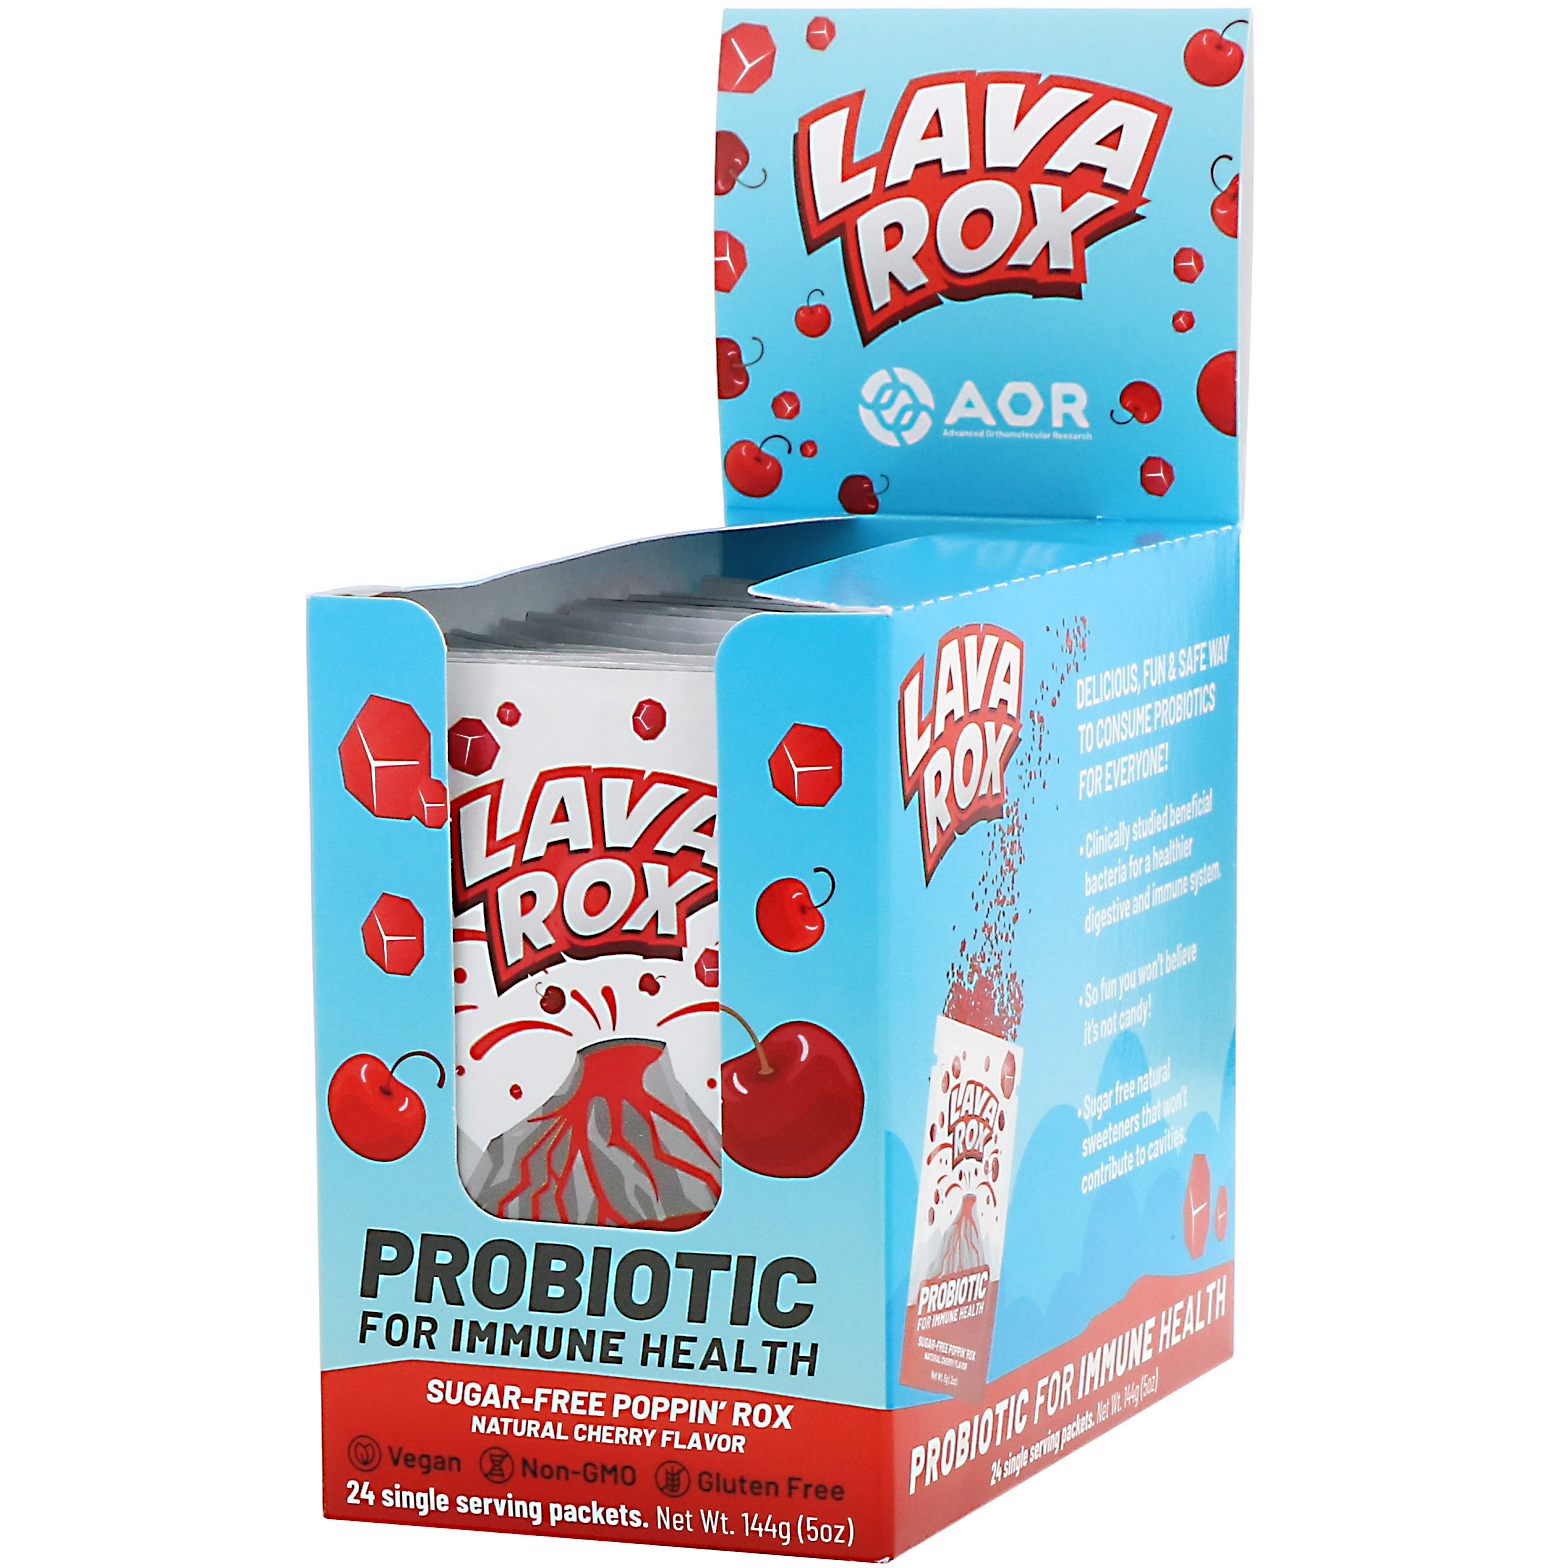 Lava Rox, Probiotic for Immune Health, Natural Cherry Flavor, 24 Packets, .2 oz 2